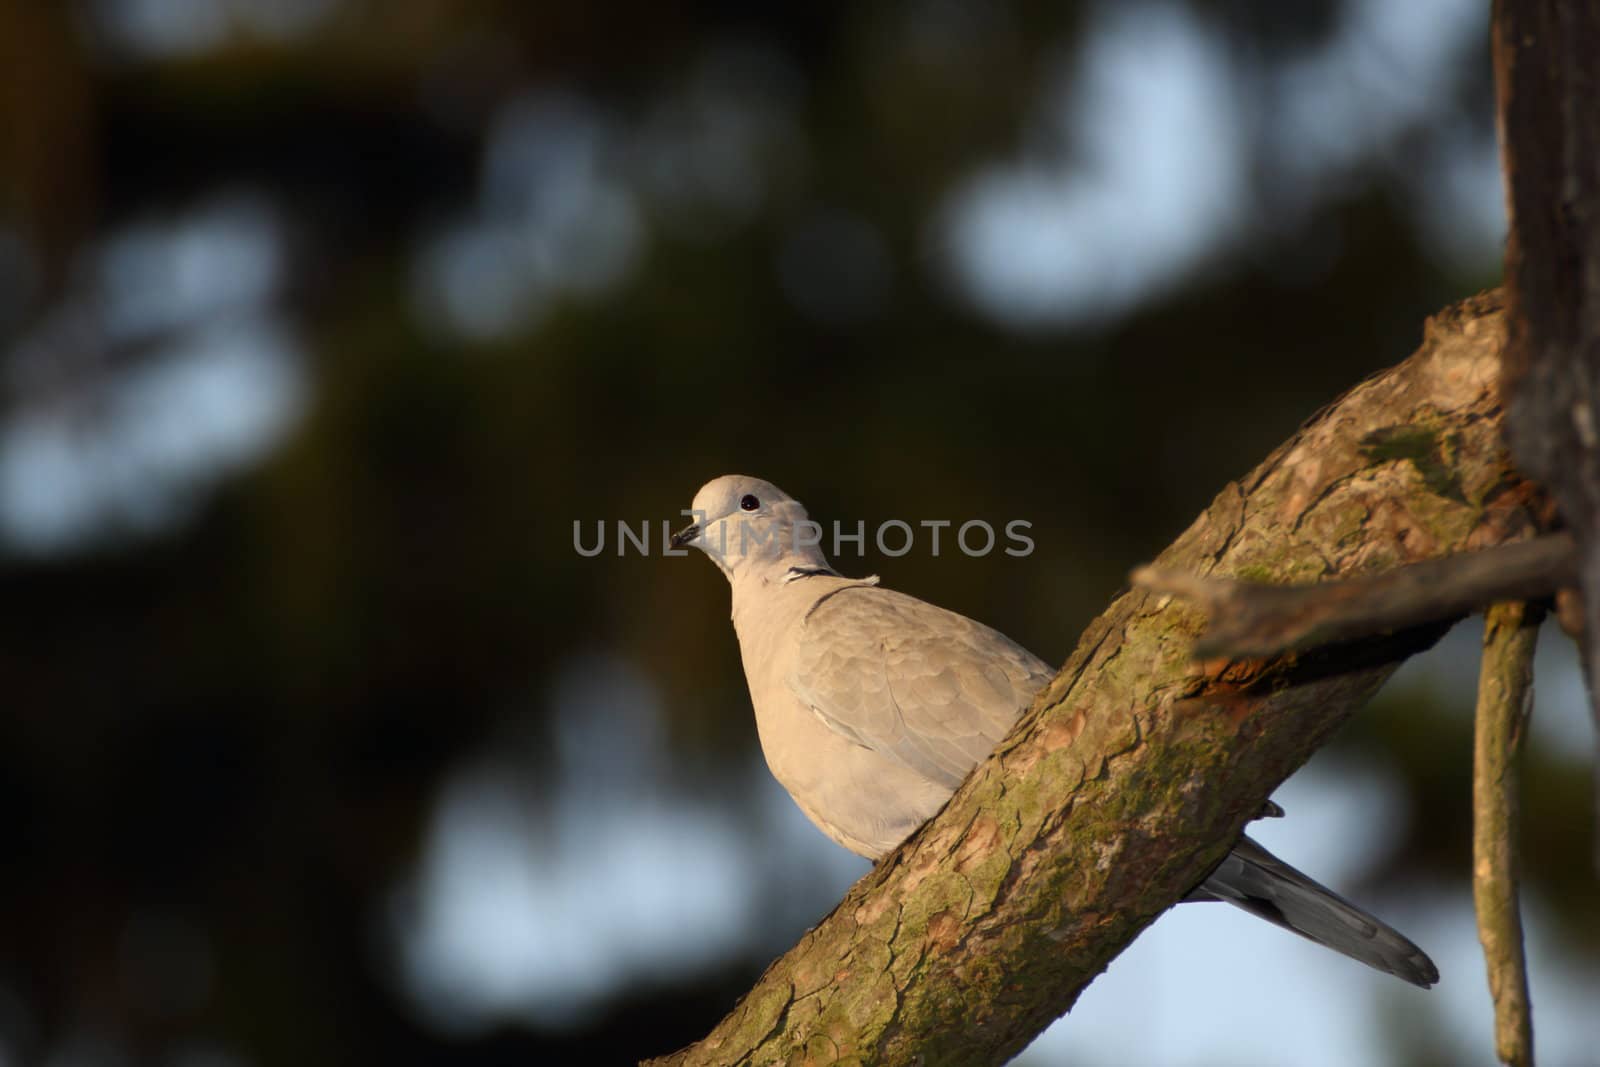 turtledove at sunset by taviphoto